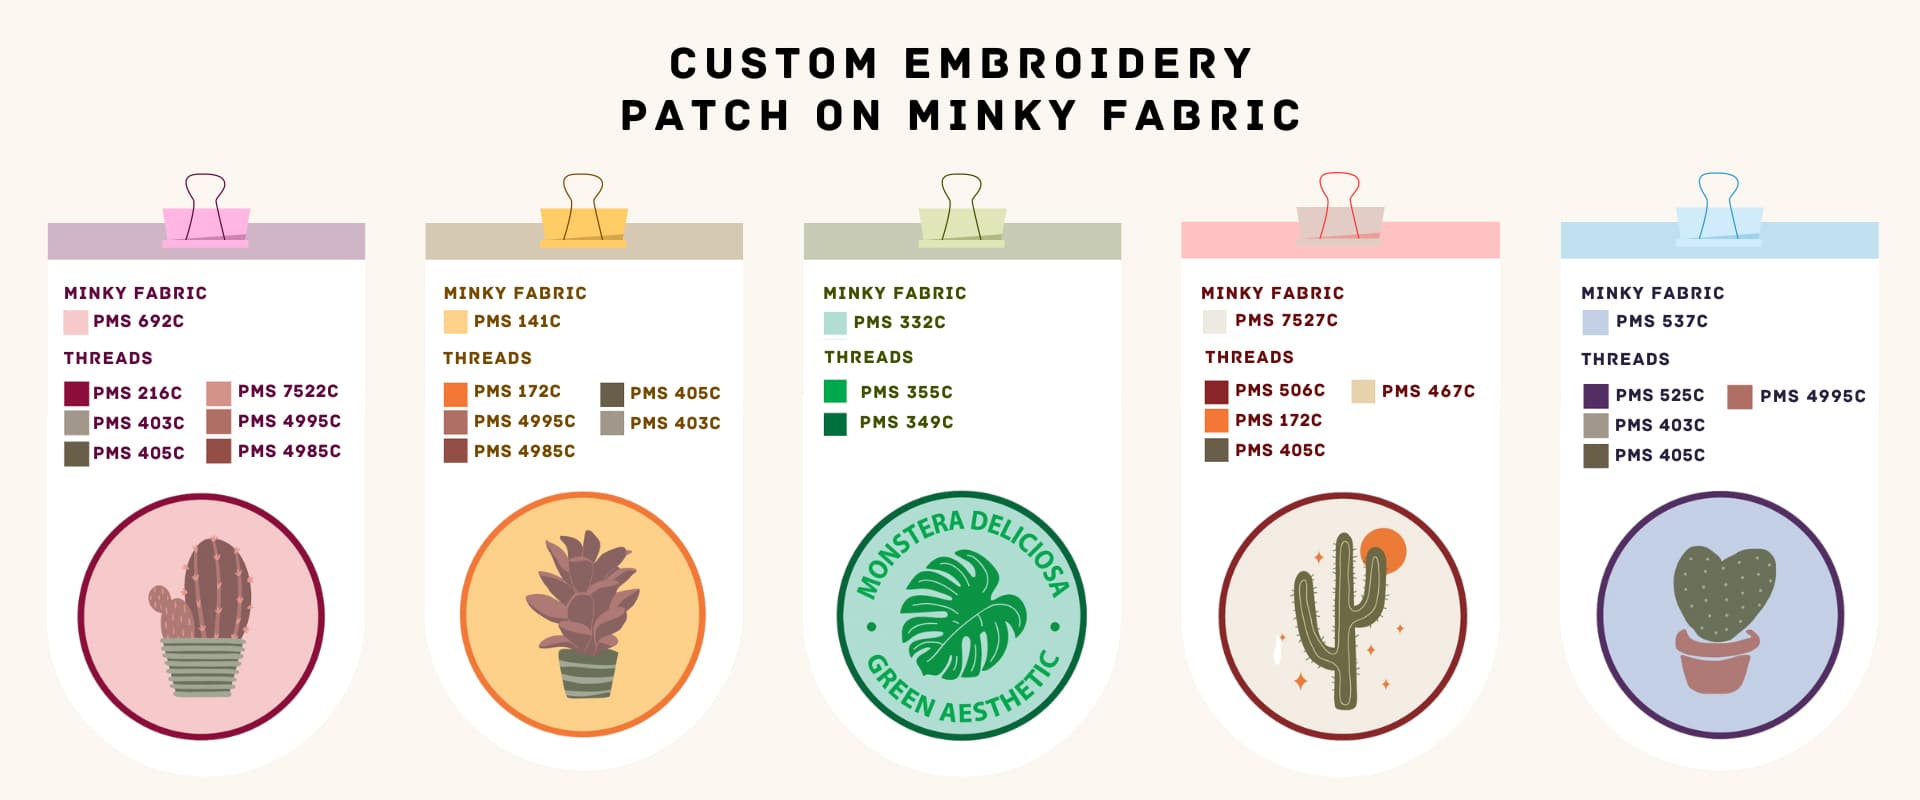 Personalized embroidery patches on minky fabric.